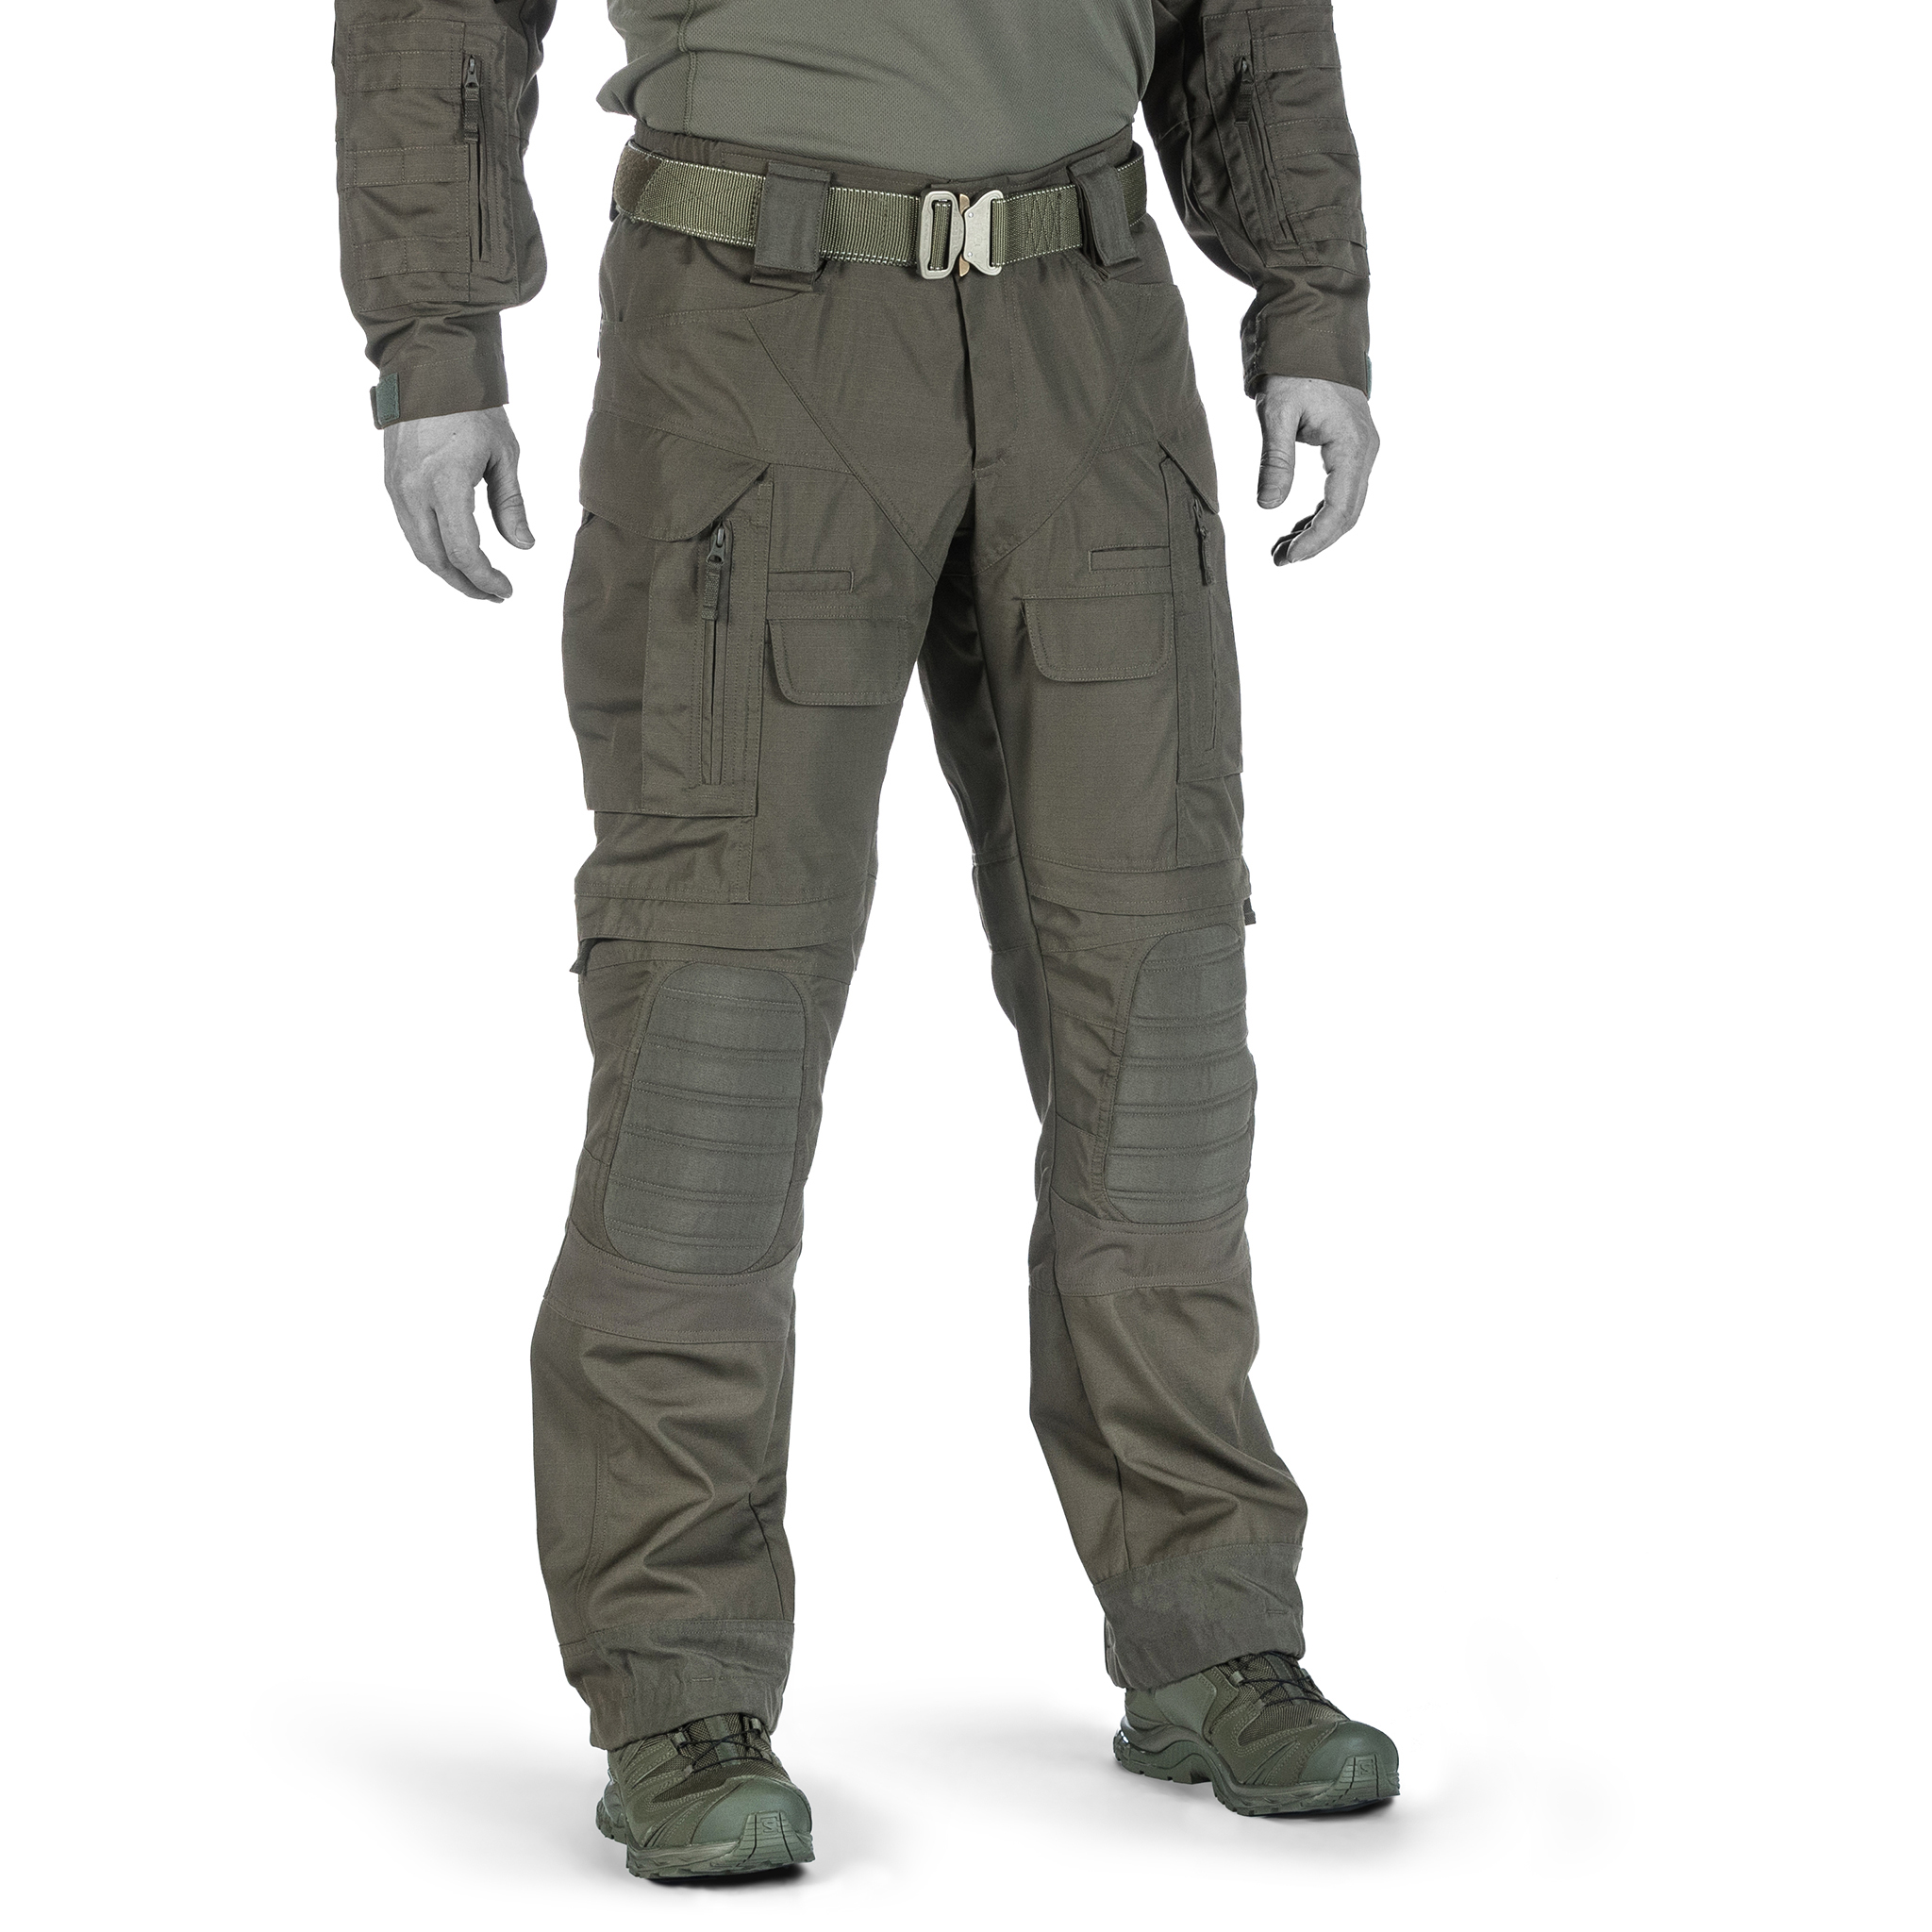 do you have stock for  STRIKER X COMBAT PANTS 30/30?